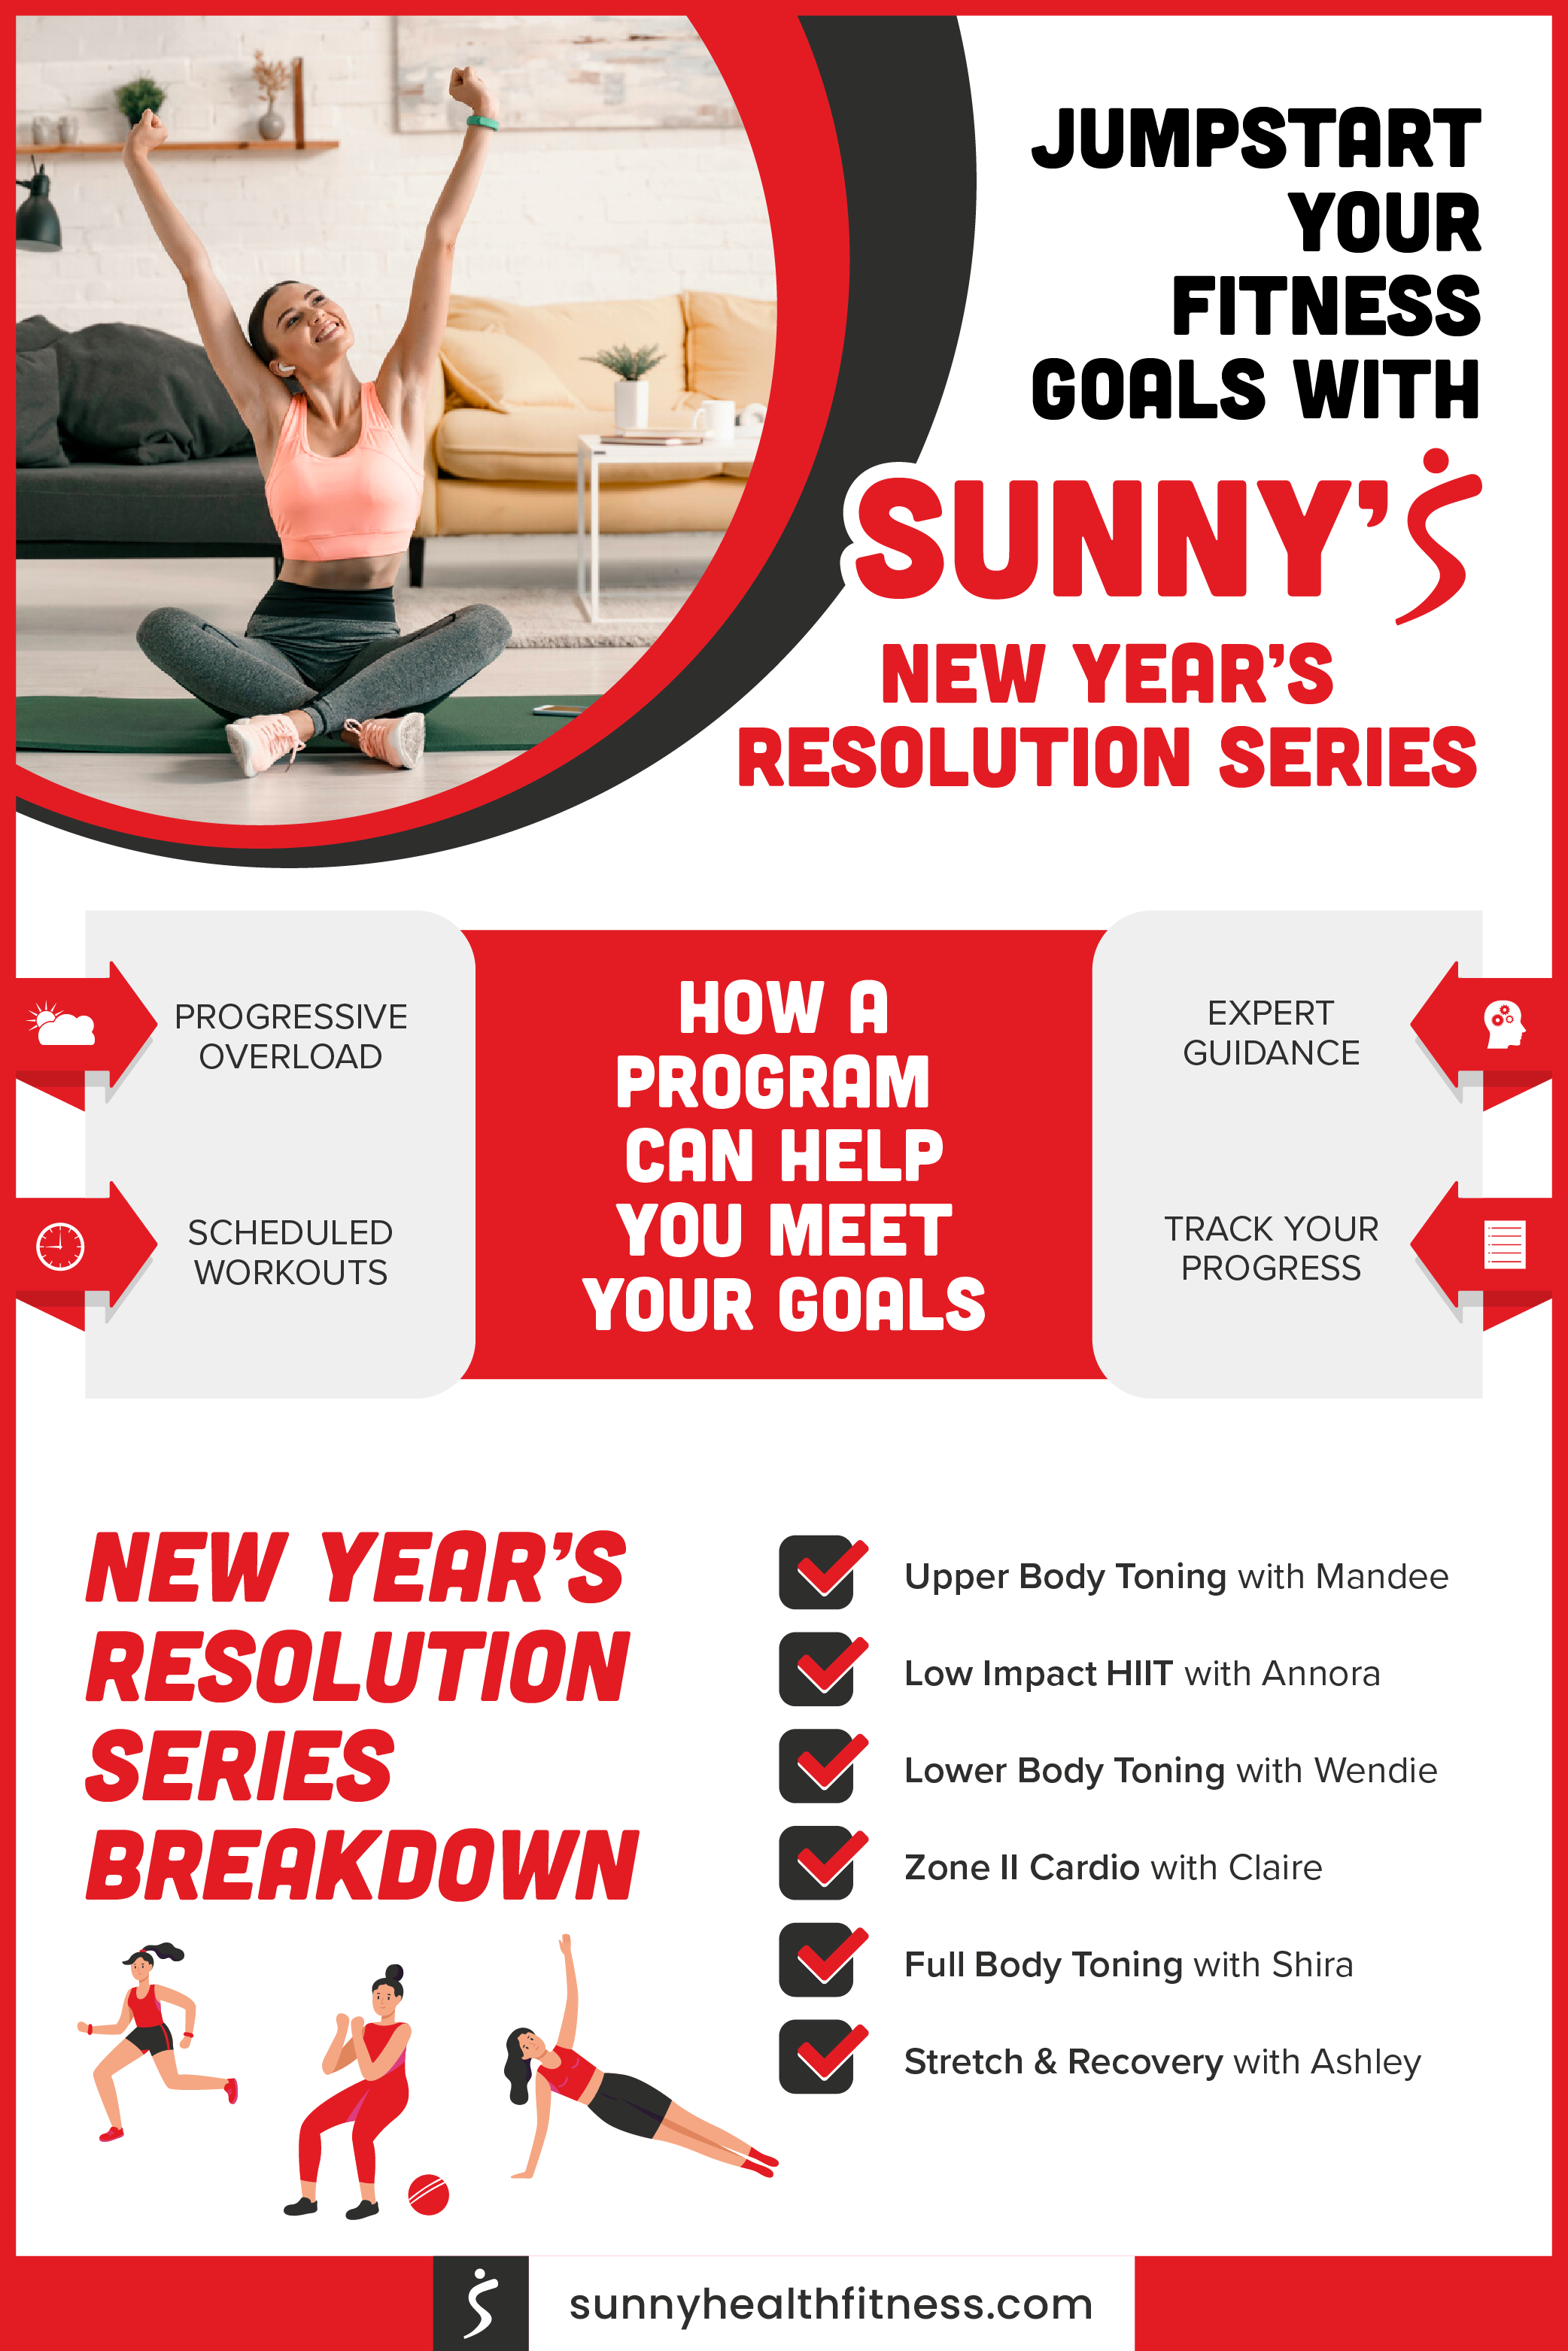 Jumpstart Your Fitness Goals With Sunny’s New Year's Resolution Series Infographic